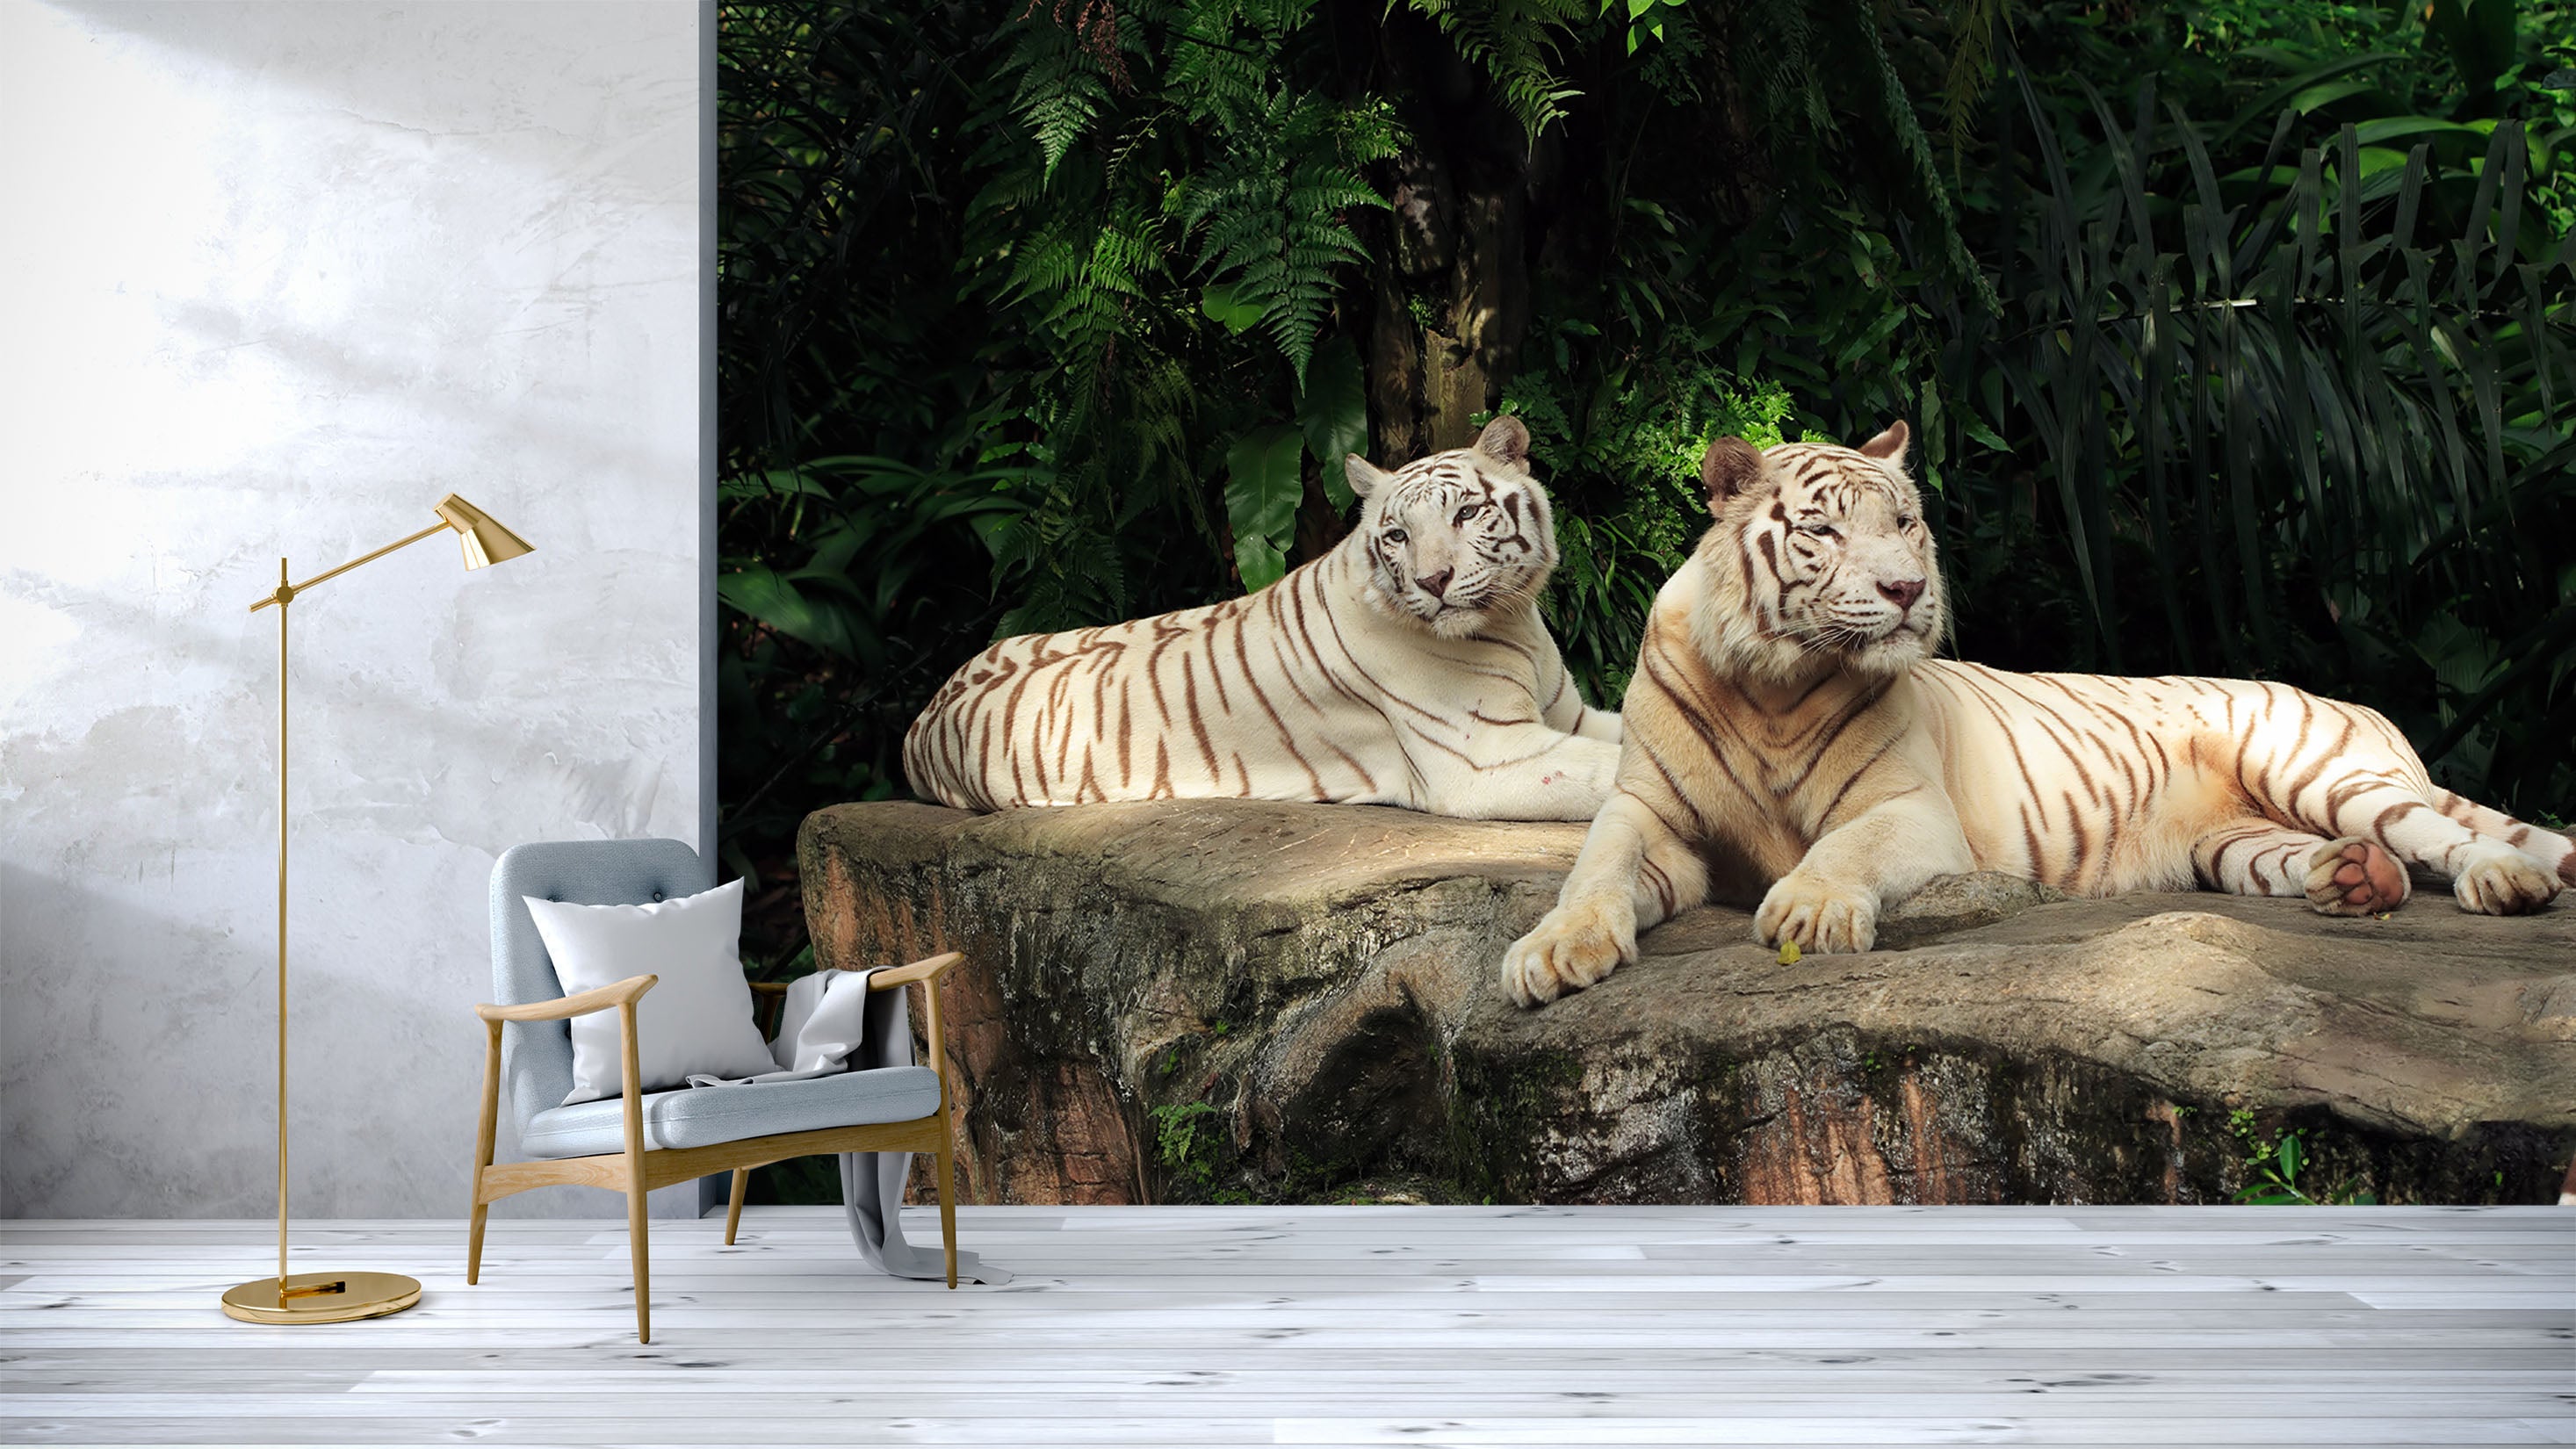 3D Two Tigers 123 Wall Murals